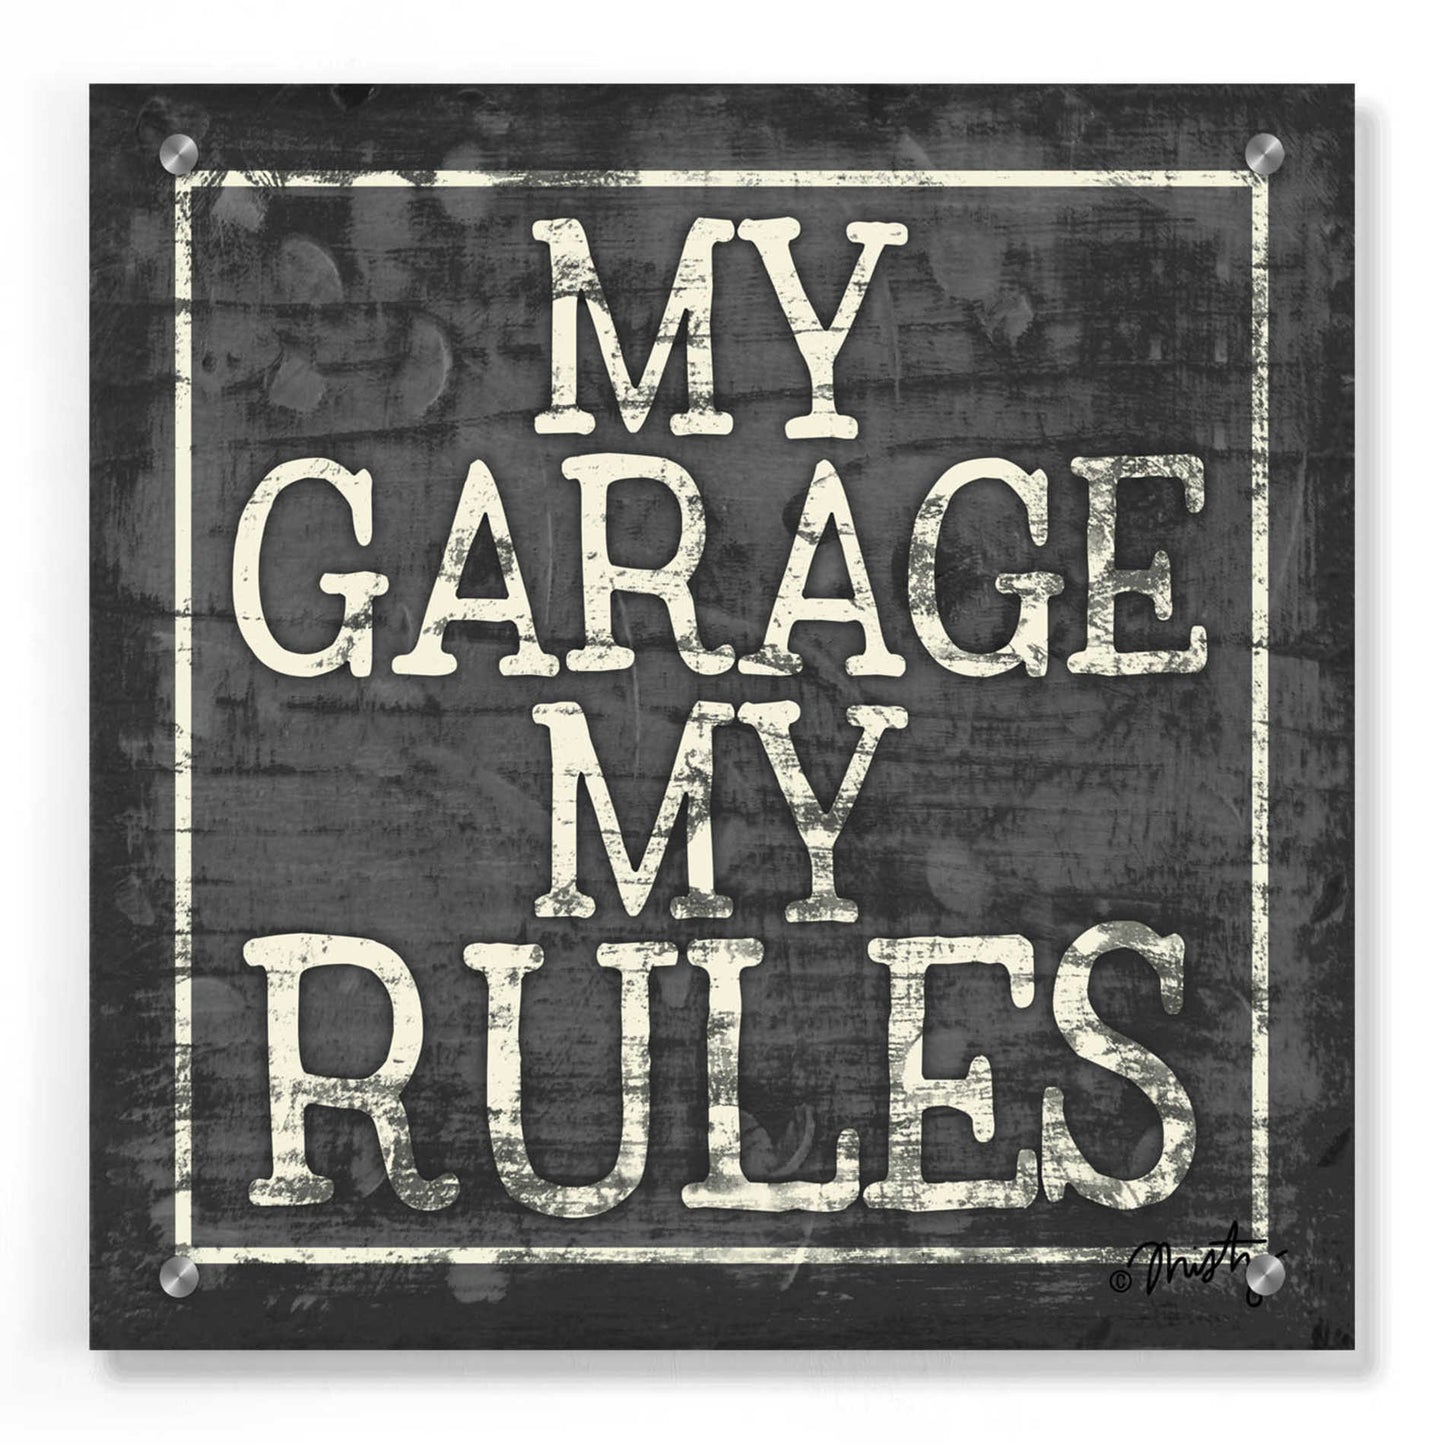 Epic Art 'My Garage, My Rules' by Misty Michelle, Acrylic Glass Wall Art,36x36